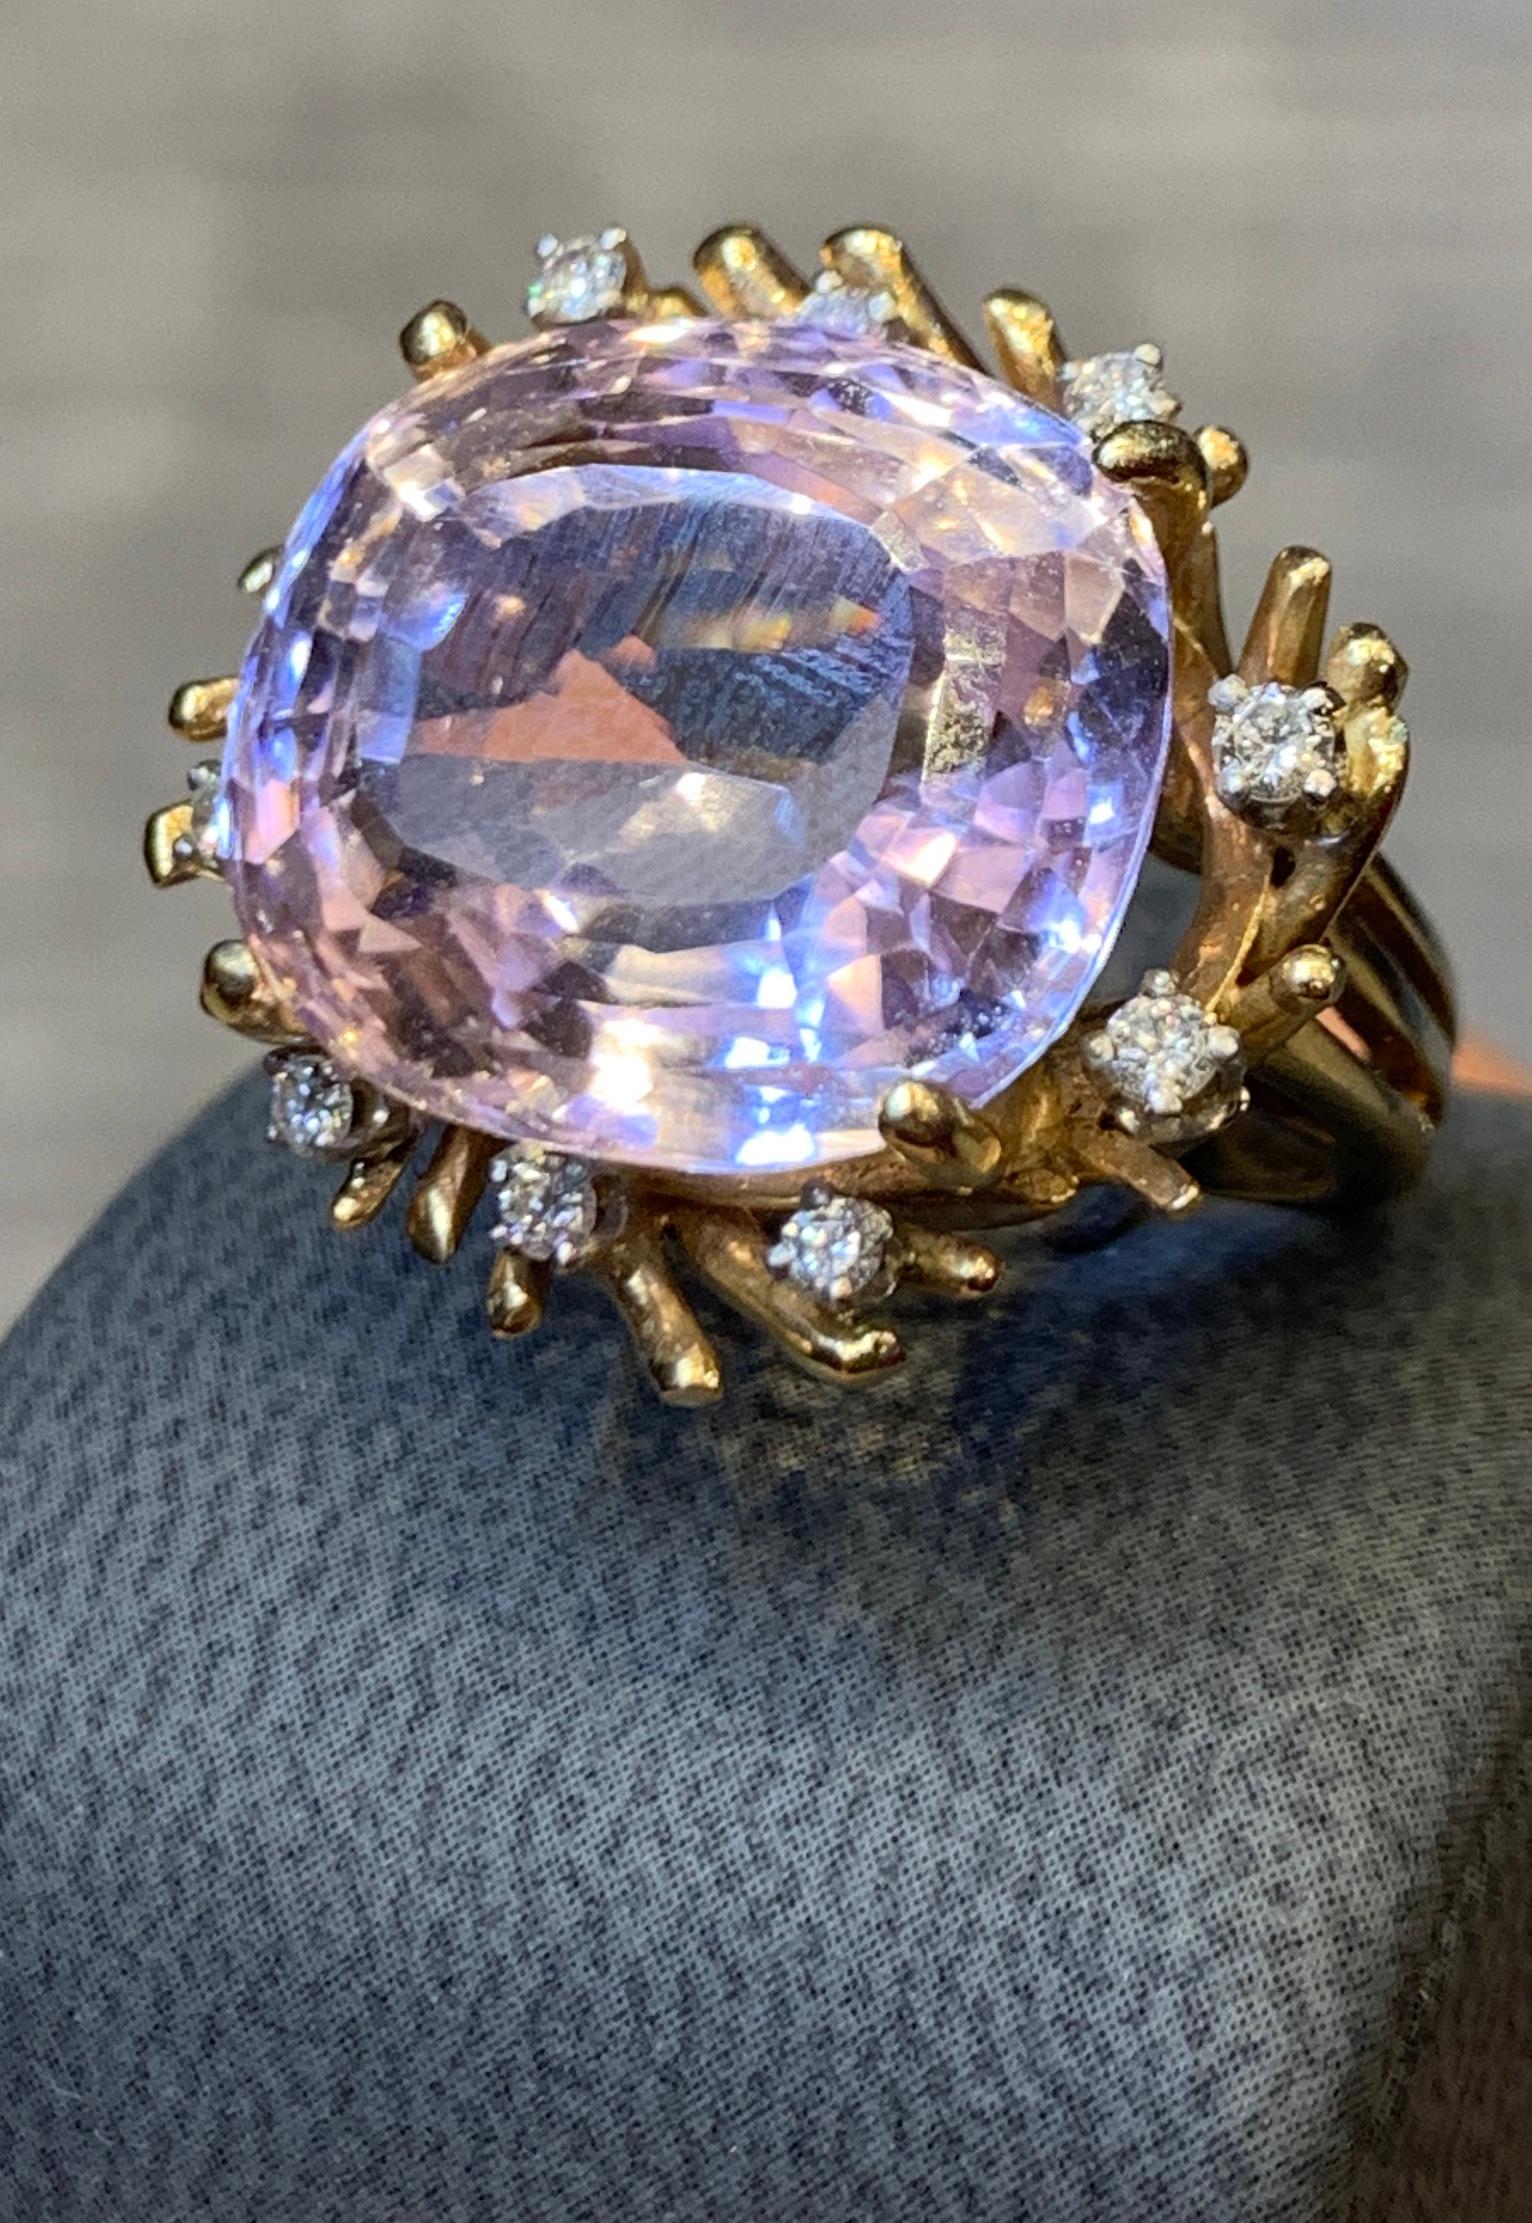 Morganite & Diamond Cocktail Ring, 1 cushion cut morganite surrounded by 10 round cut diamonds all set in a split shank 14k yellow gold setting

Ring Size: 5.5 

Re sizable free of charge
